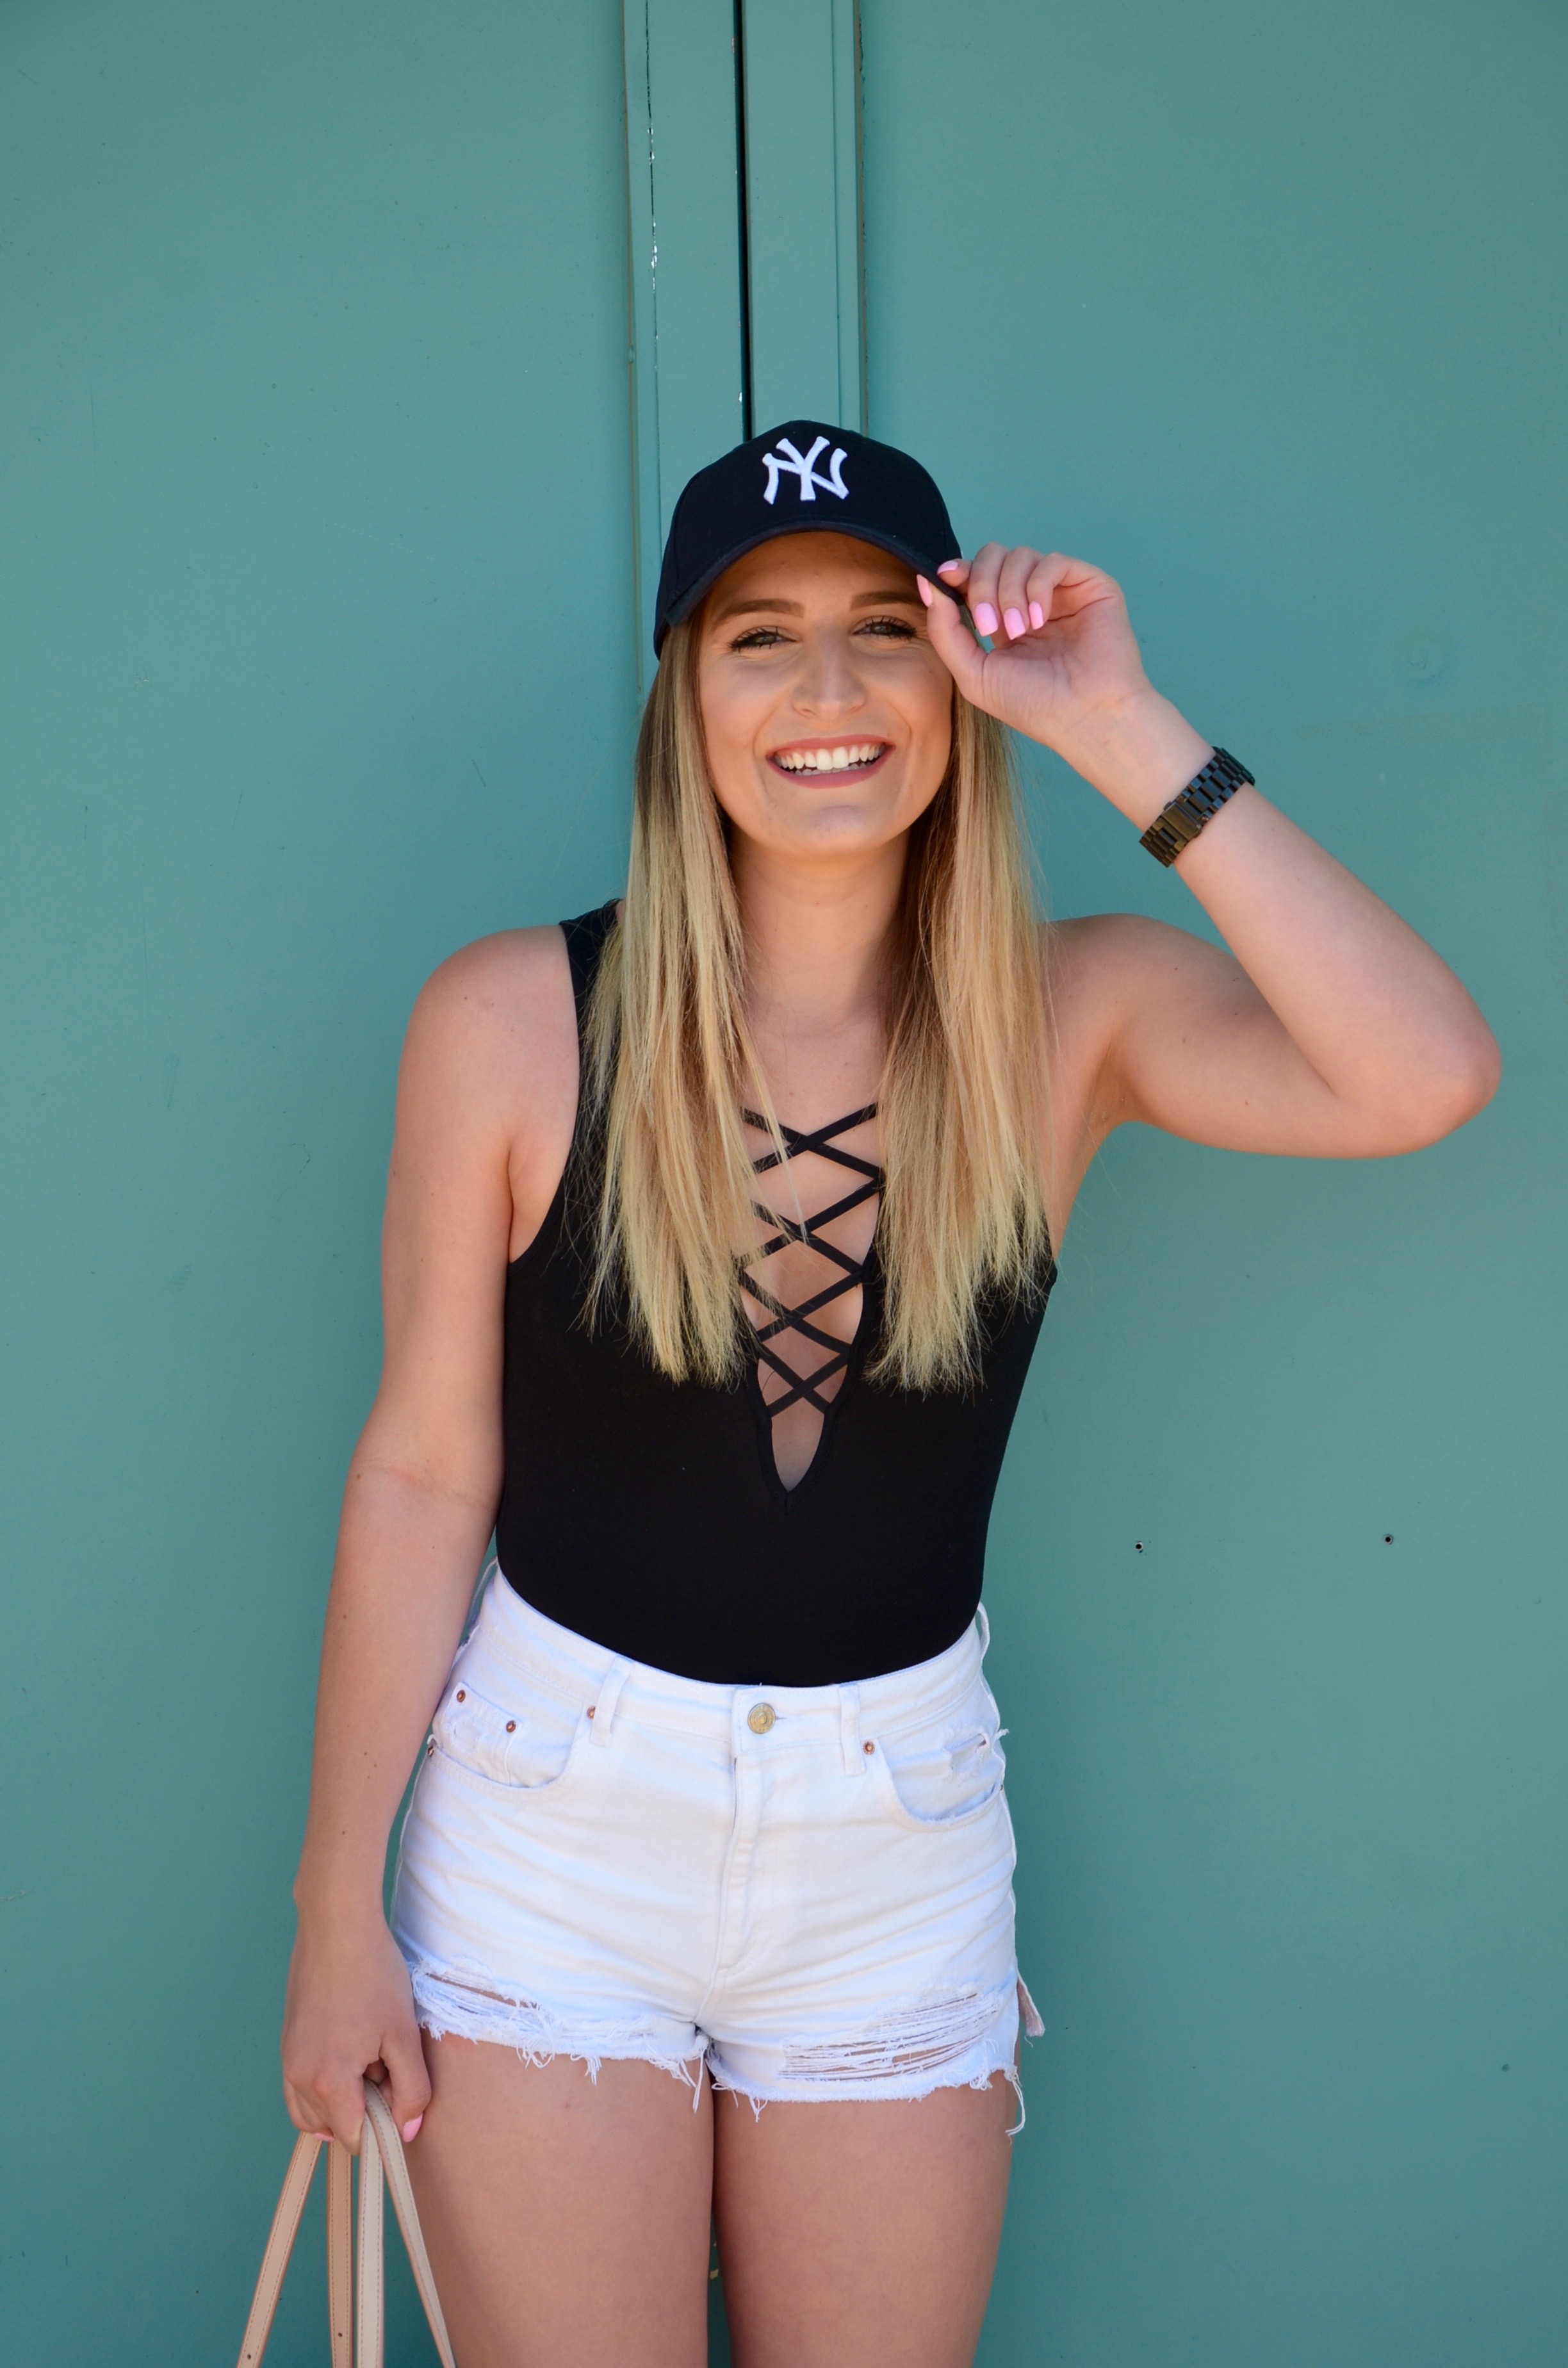 lace up top and white shorts - Travel Outfit Of The Day by popular Texas style blogger Audrey Madison Stowe